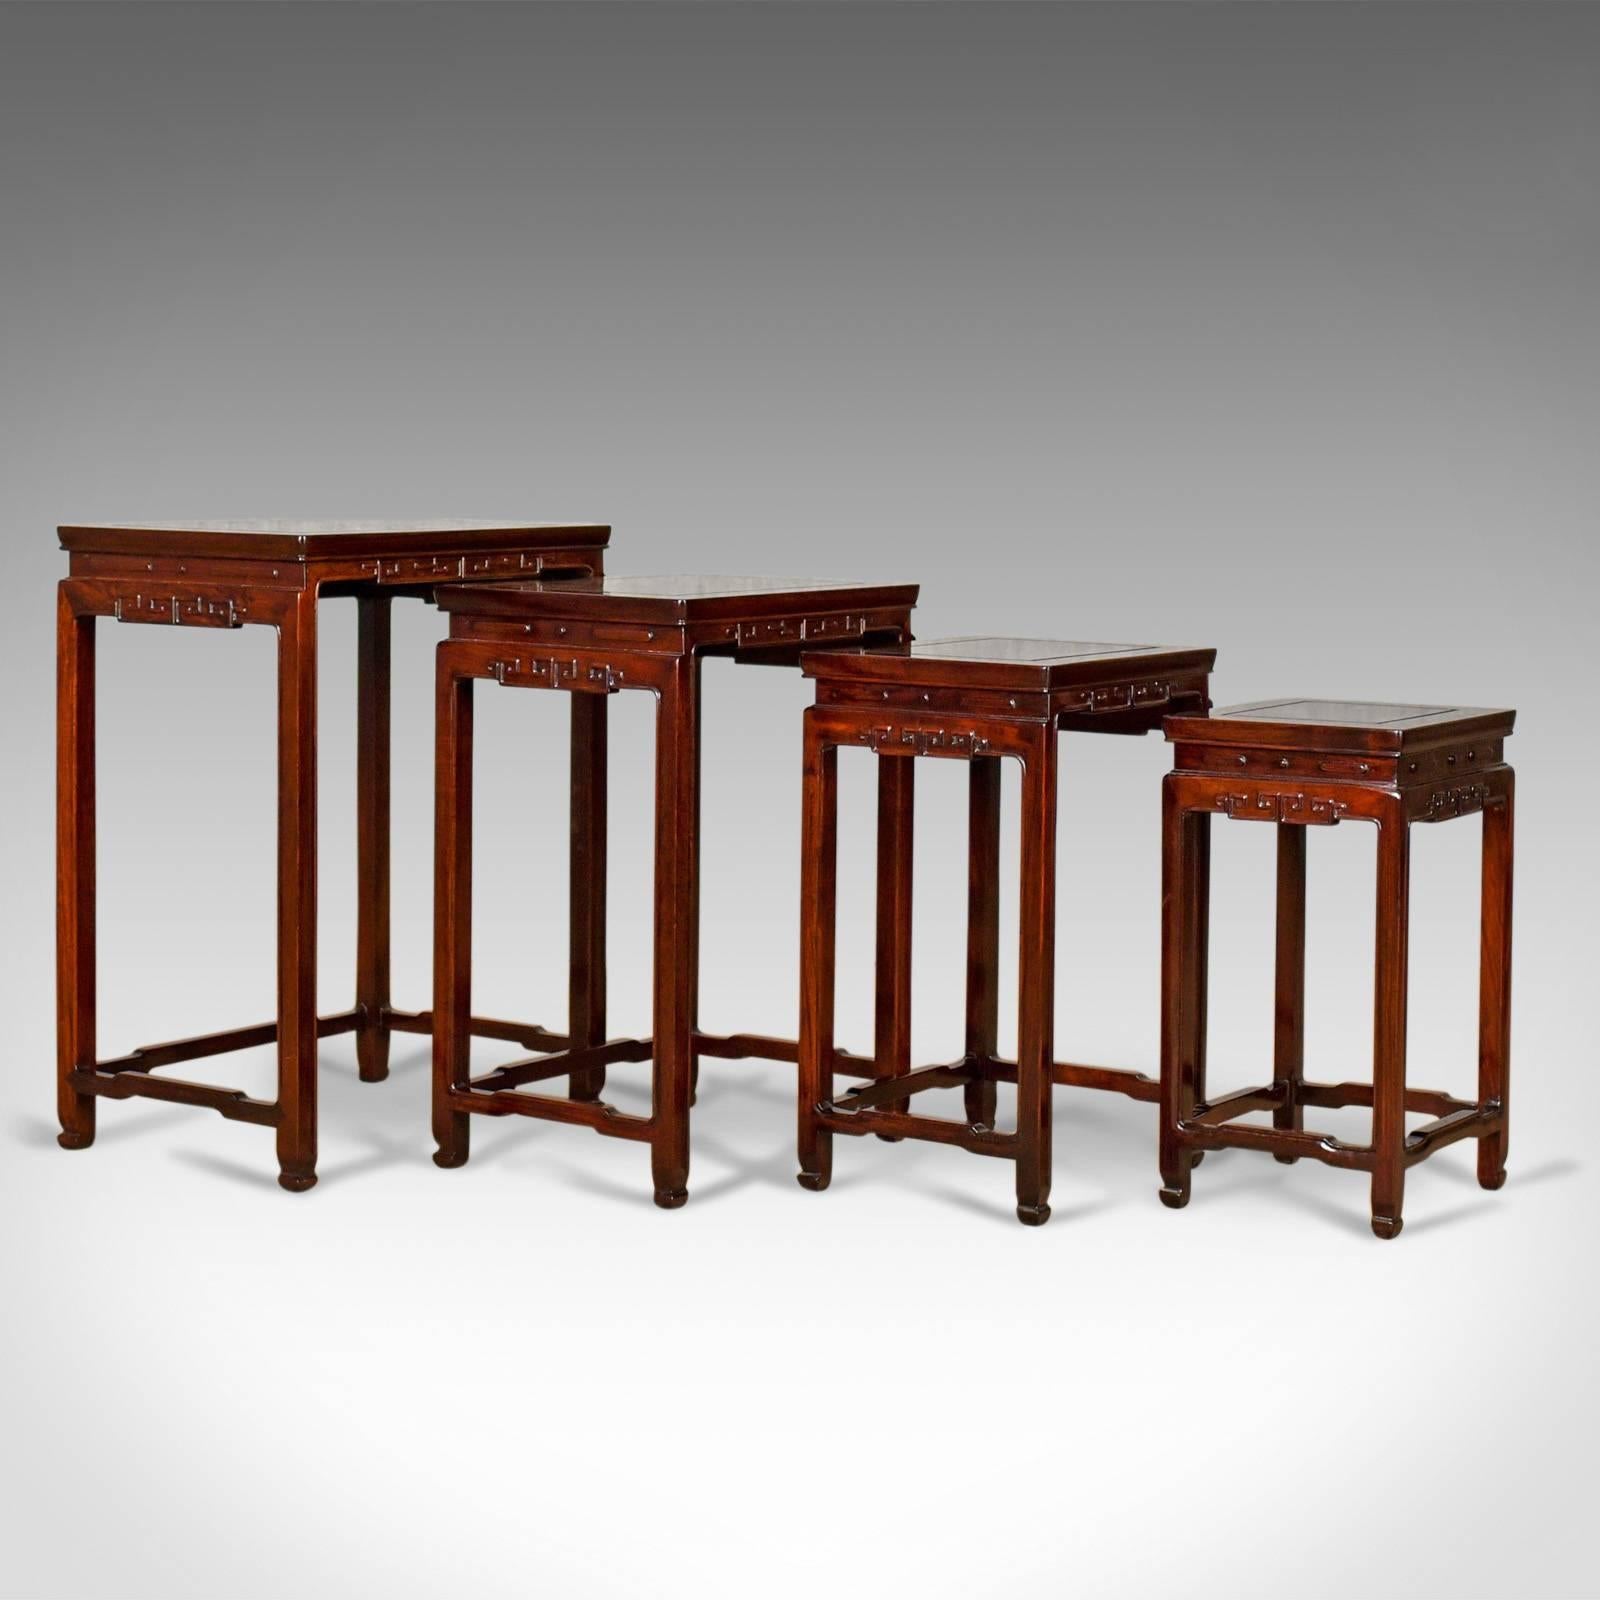 This is a nest of four tables with an Oriental influence, Chinese rosewood side, or occasional, tables from the late 20th century.

Superb craftsmanship and attention to detail
Oriental overtones to styling
Rich, dark tones and good grain